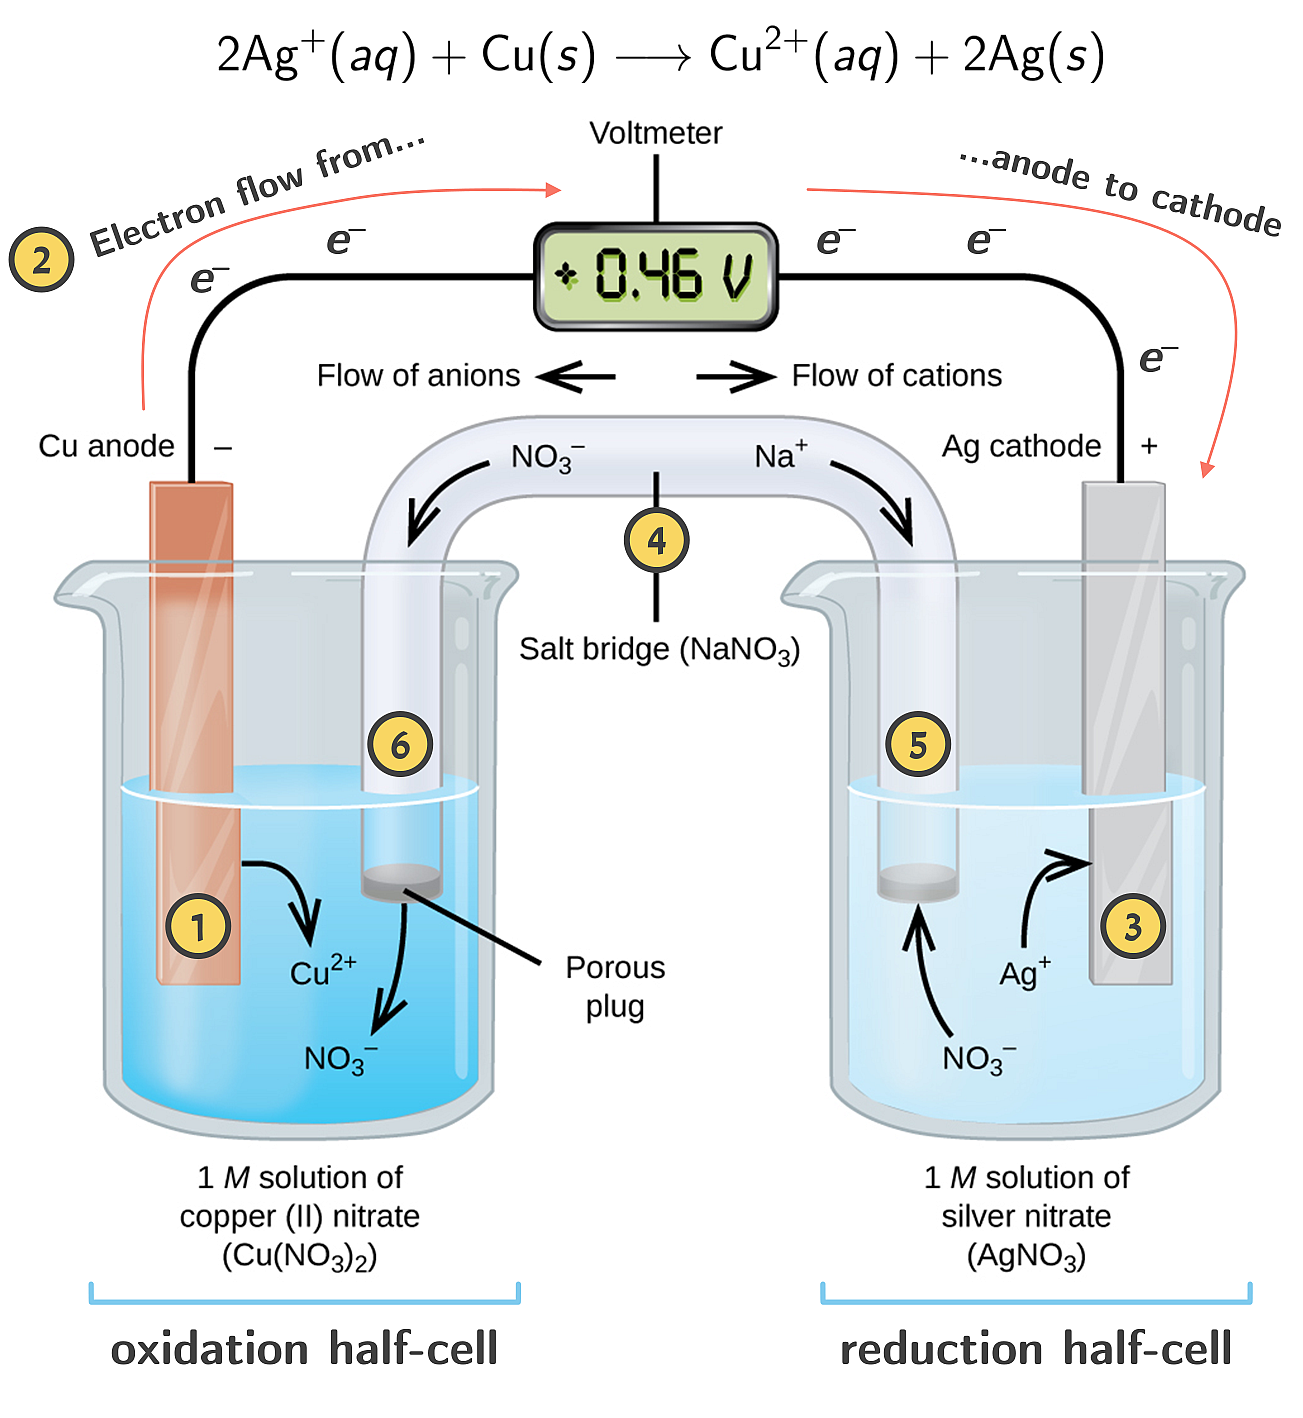 A galvanic cell. Adapted from [openStax](https://openstax.org/books/chemistry-2e/pages/17-2-galvanic-cells)